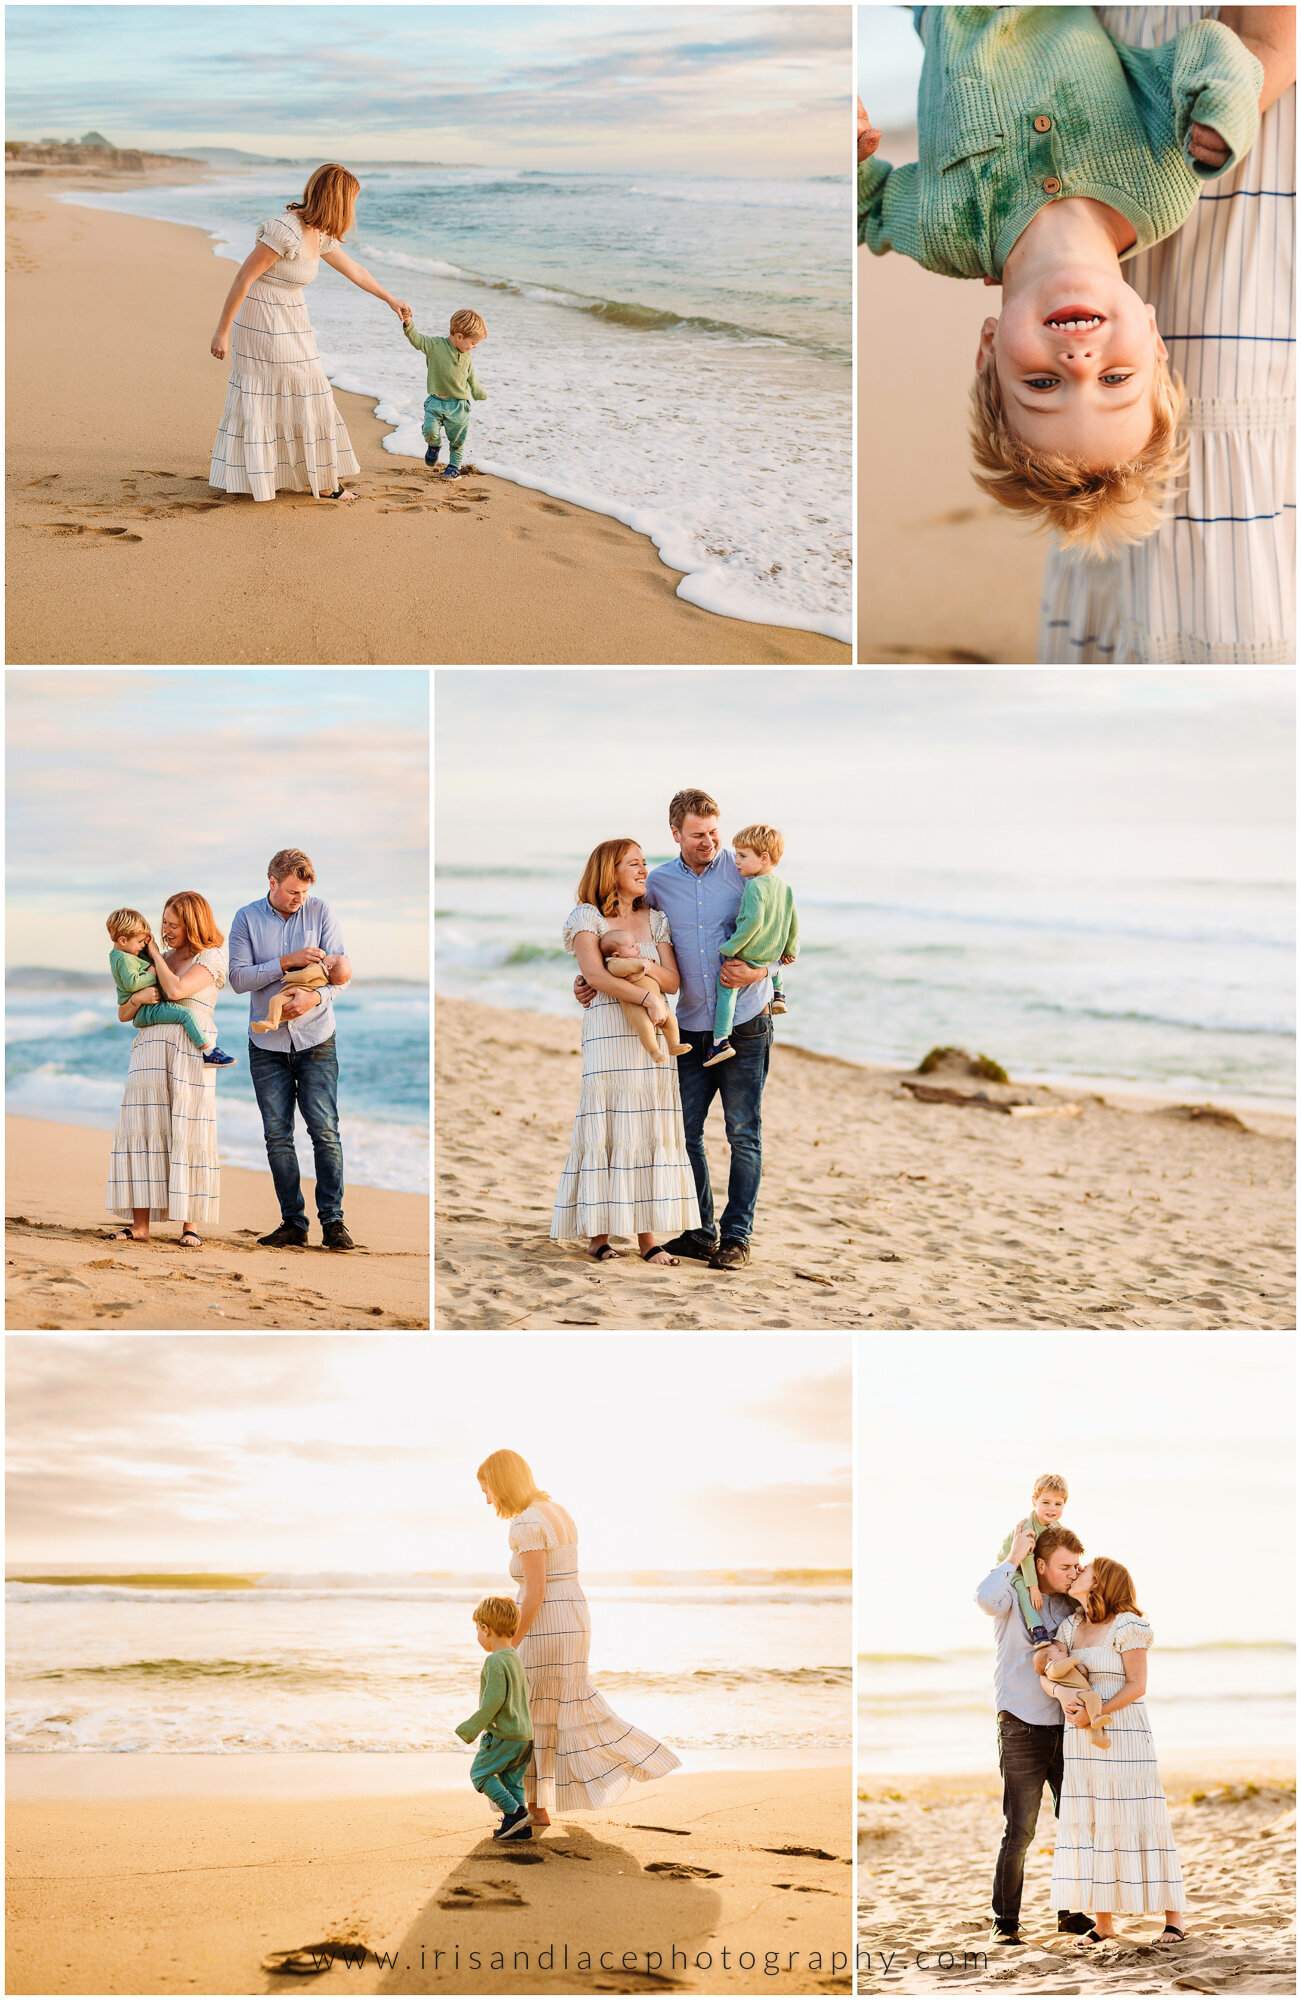 SF Bay Area Beach Family Photography  | Iris and Lace Photography